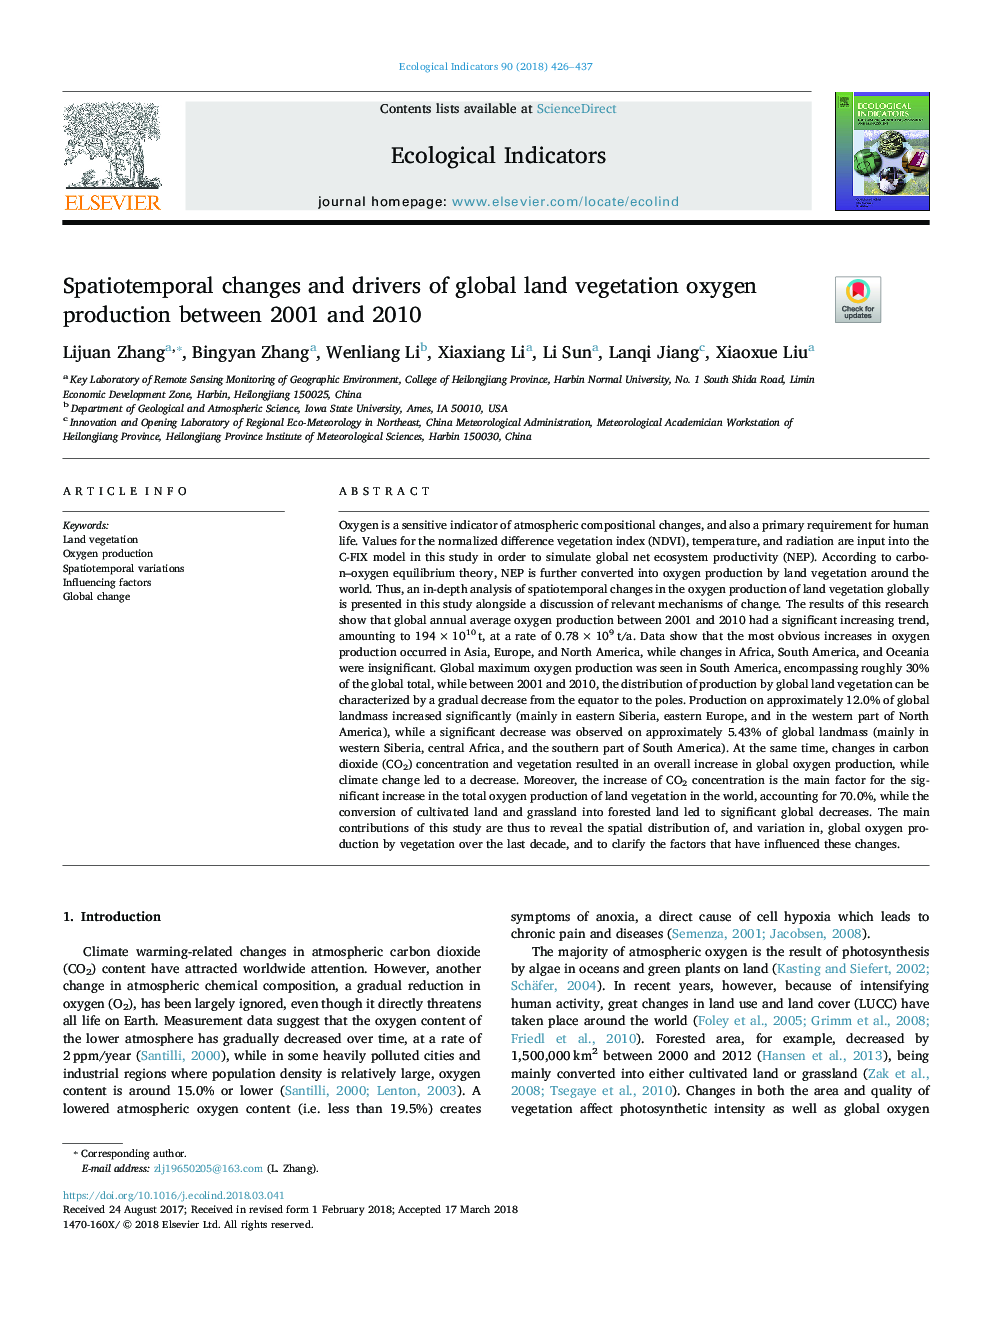 Spatiotemporal changes and drivers of global land vegetation oxygen production between 2001 and 2010